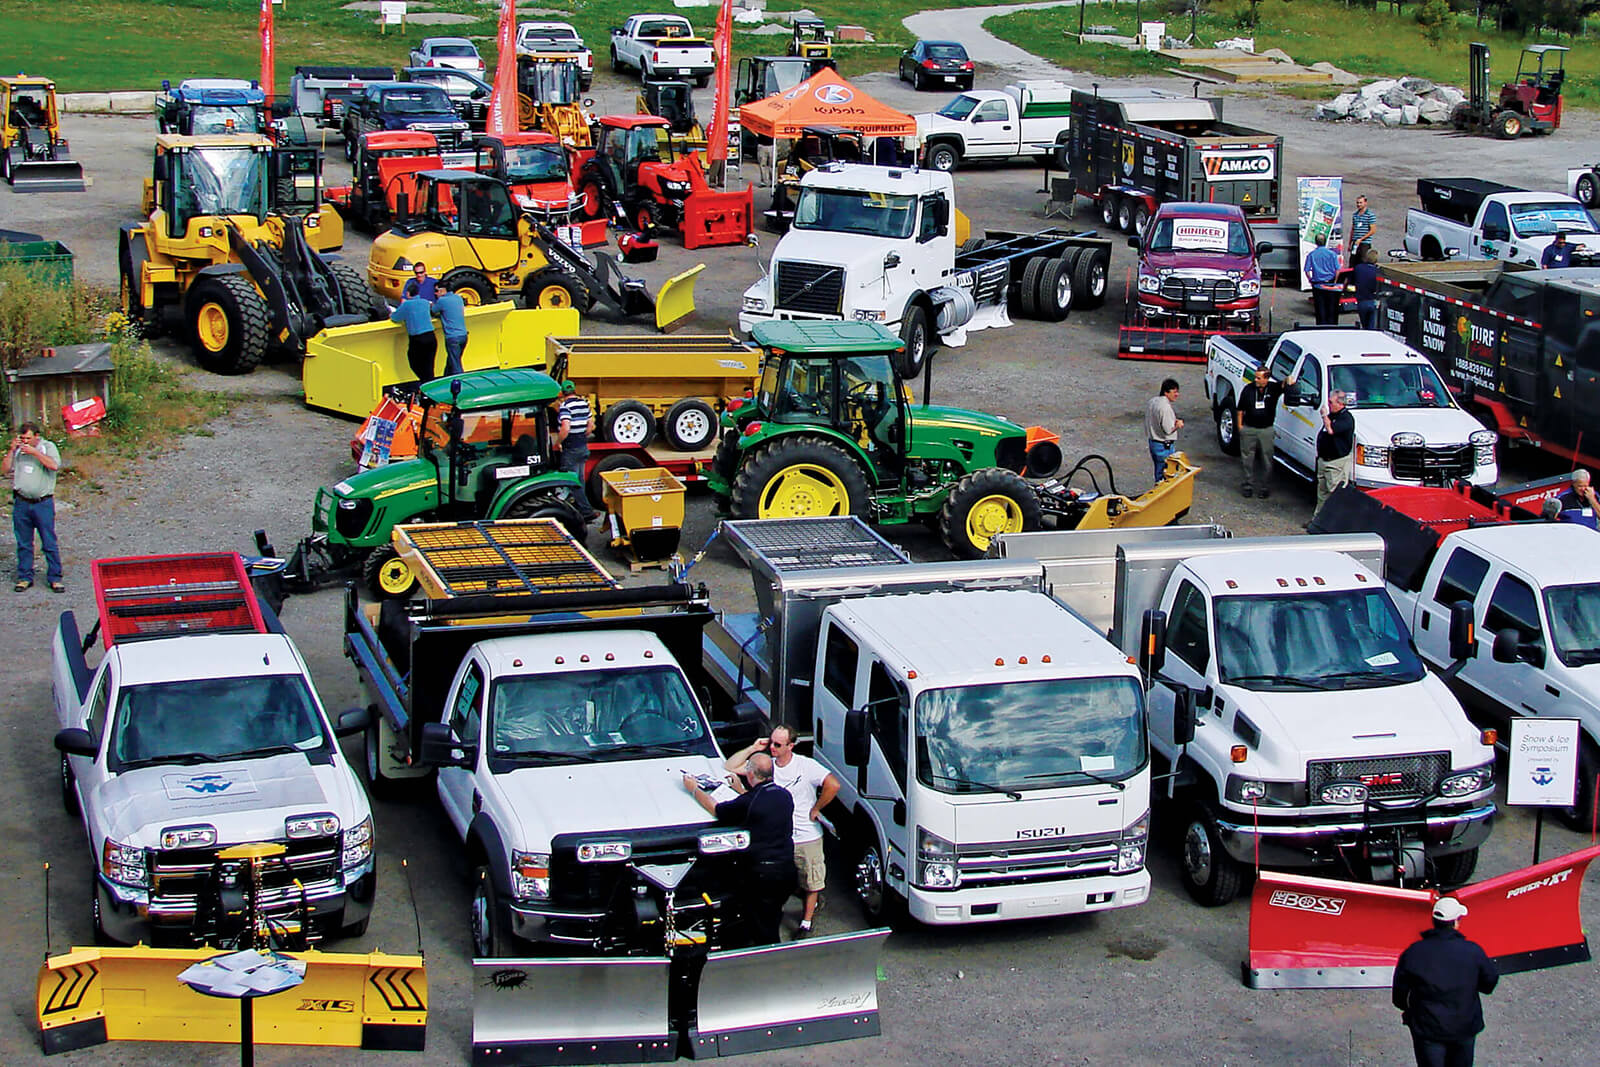 snow removal equipment at an outdoor trade show